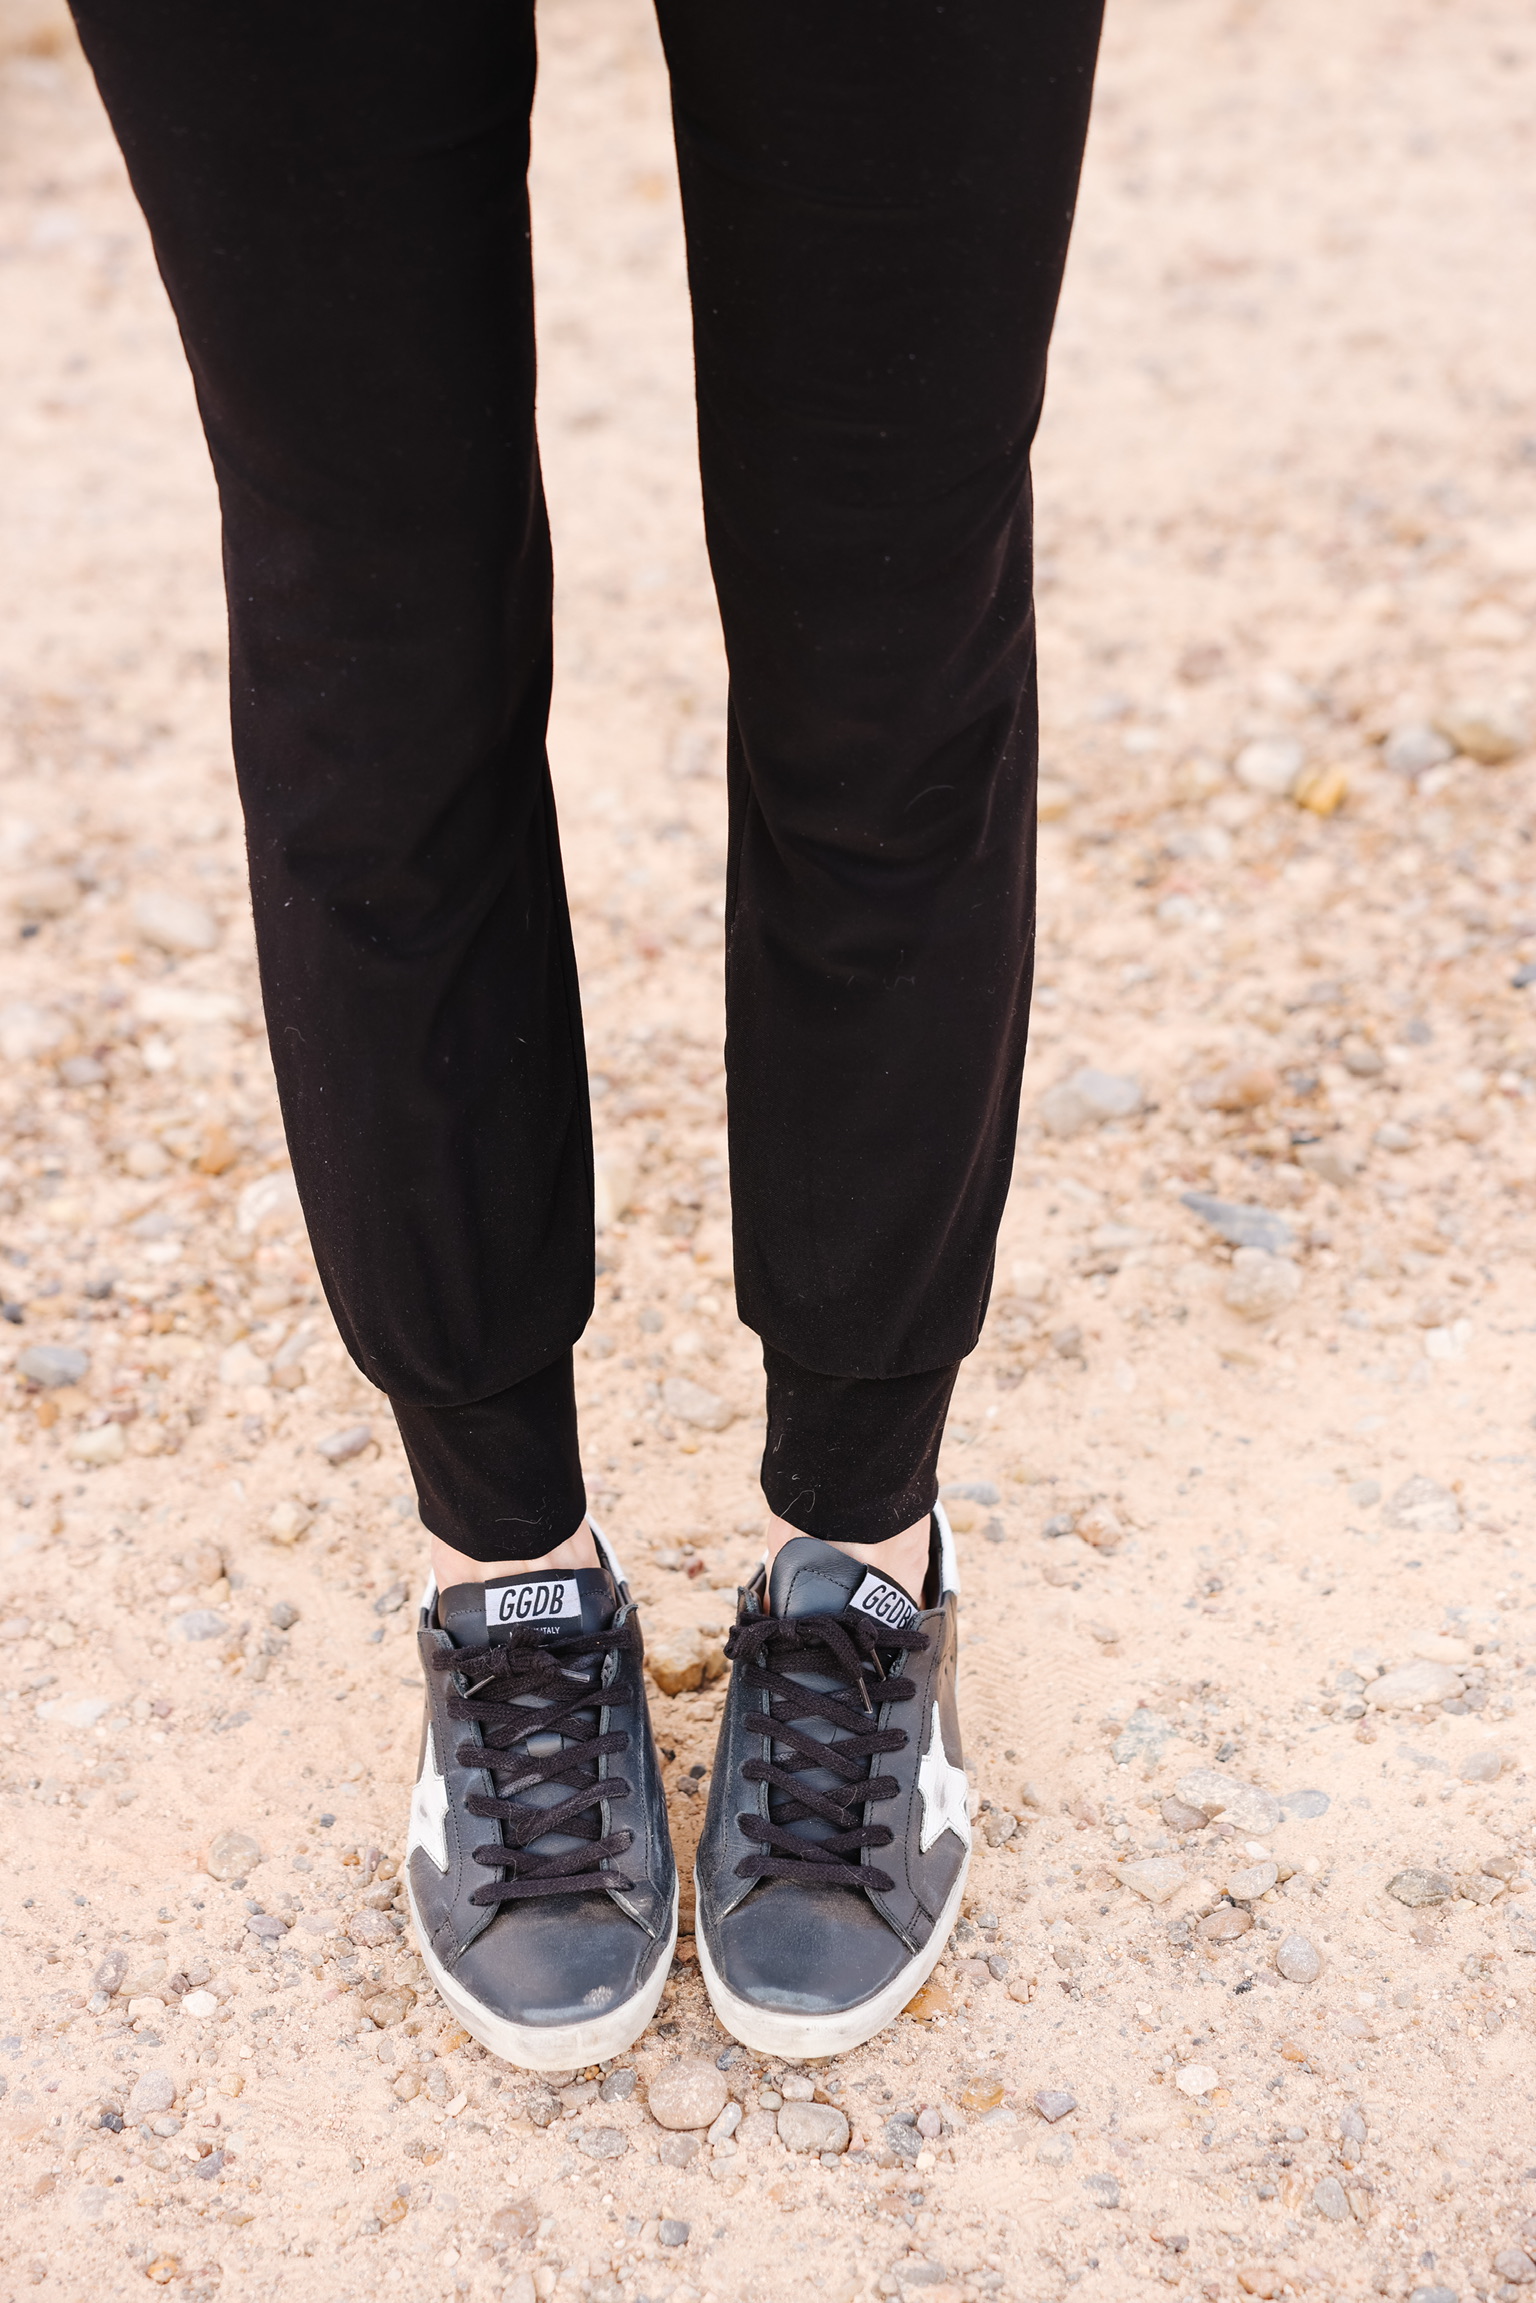 Elevated Basics, Erin Busbee of Busbee wearing black golden goose sneakers with black joggers by Norma Kamali in south texas